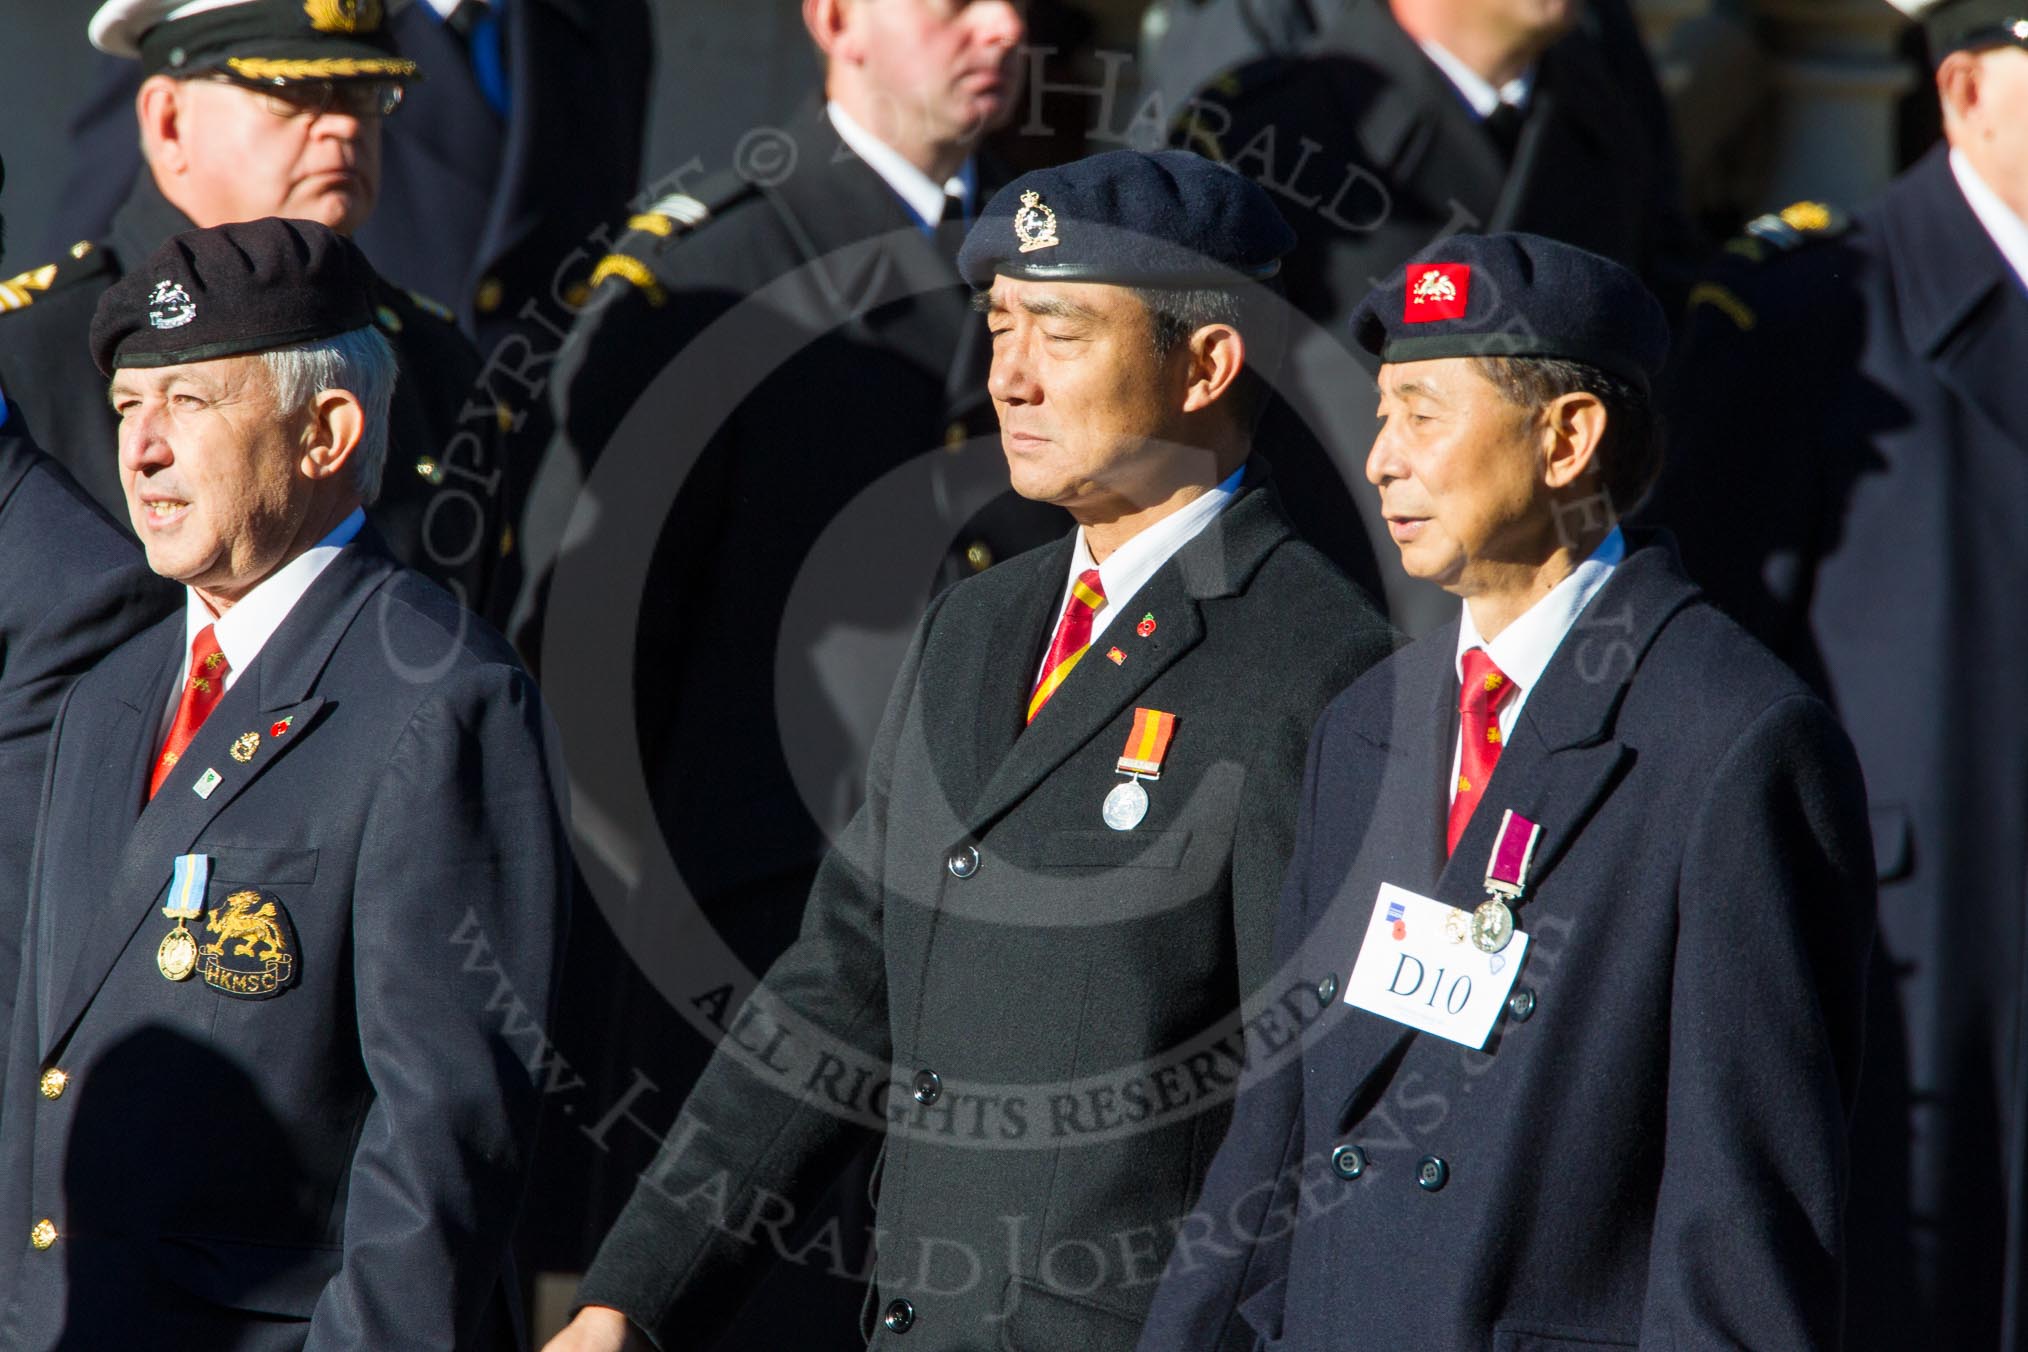 Remembrance Sunday Cenotaph March Past 2013: D10 - Hong Kong Military Service Corps..
Press stand opposite the Foreign Office building, Whitehall, London SW1,
London,
Greater London,
United Kingdom,
on 10 November 2013 at 11:39, image #85